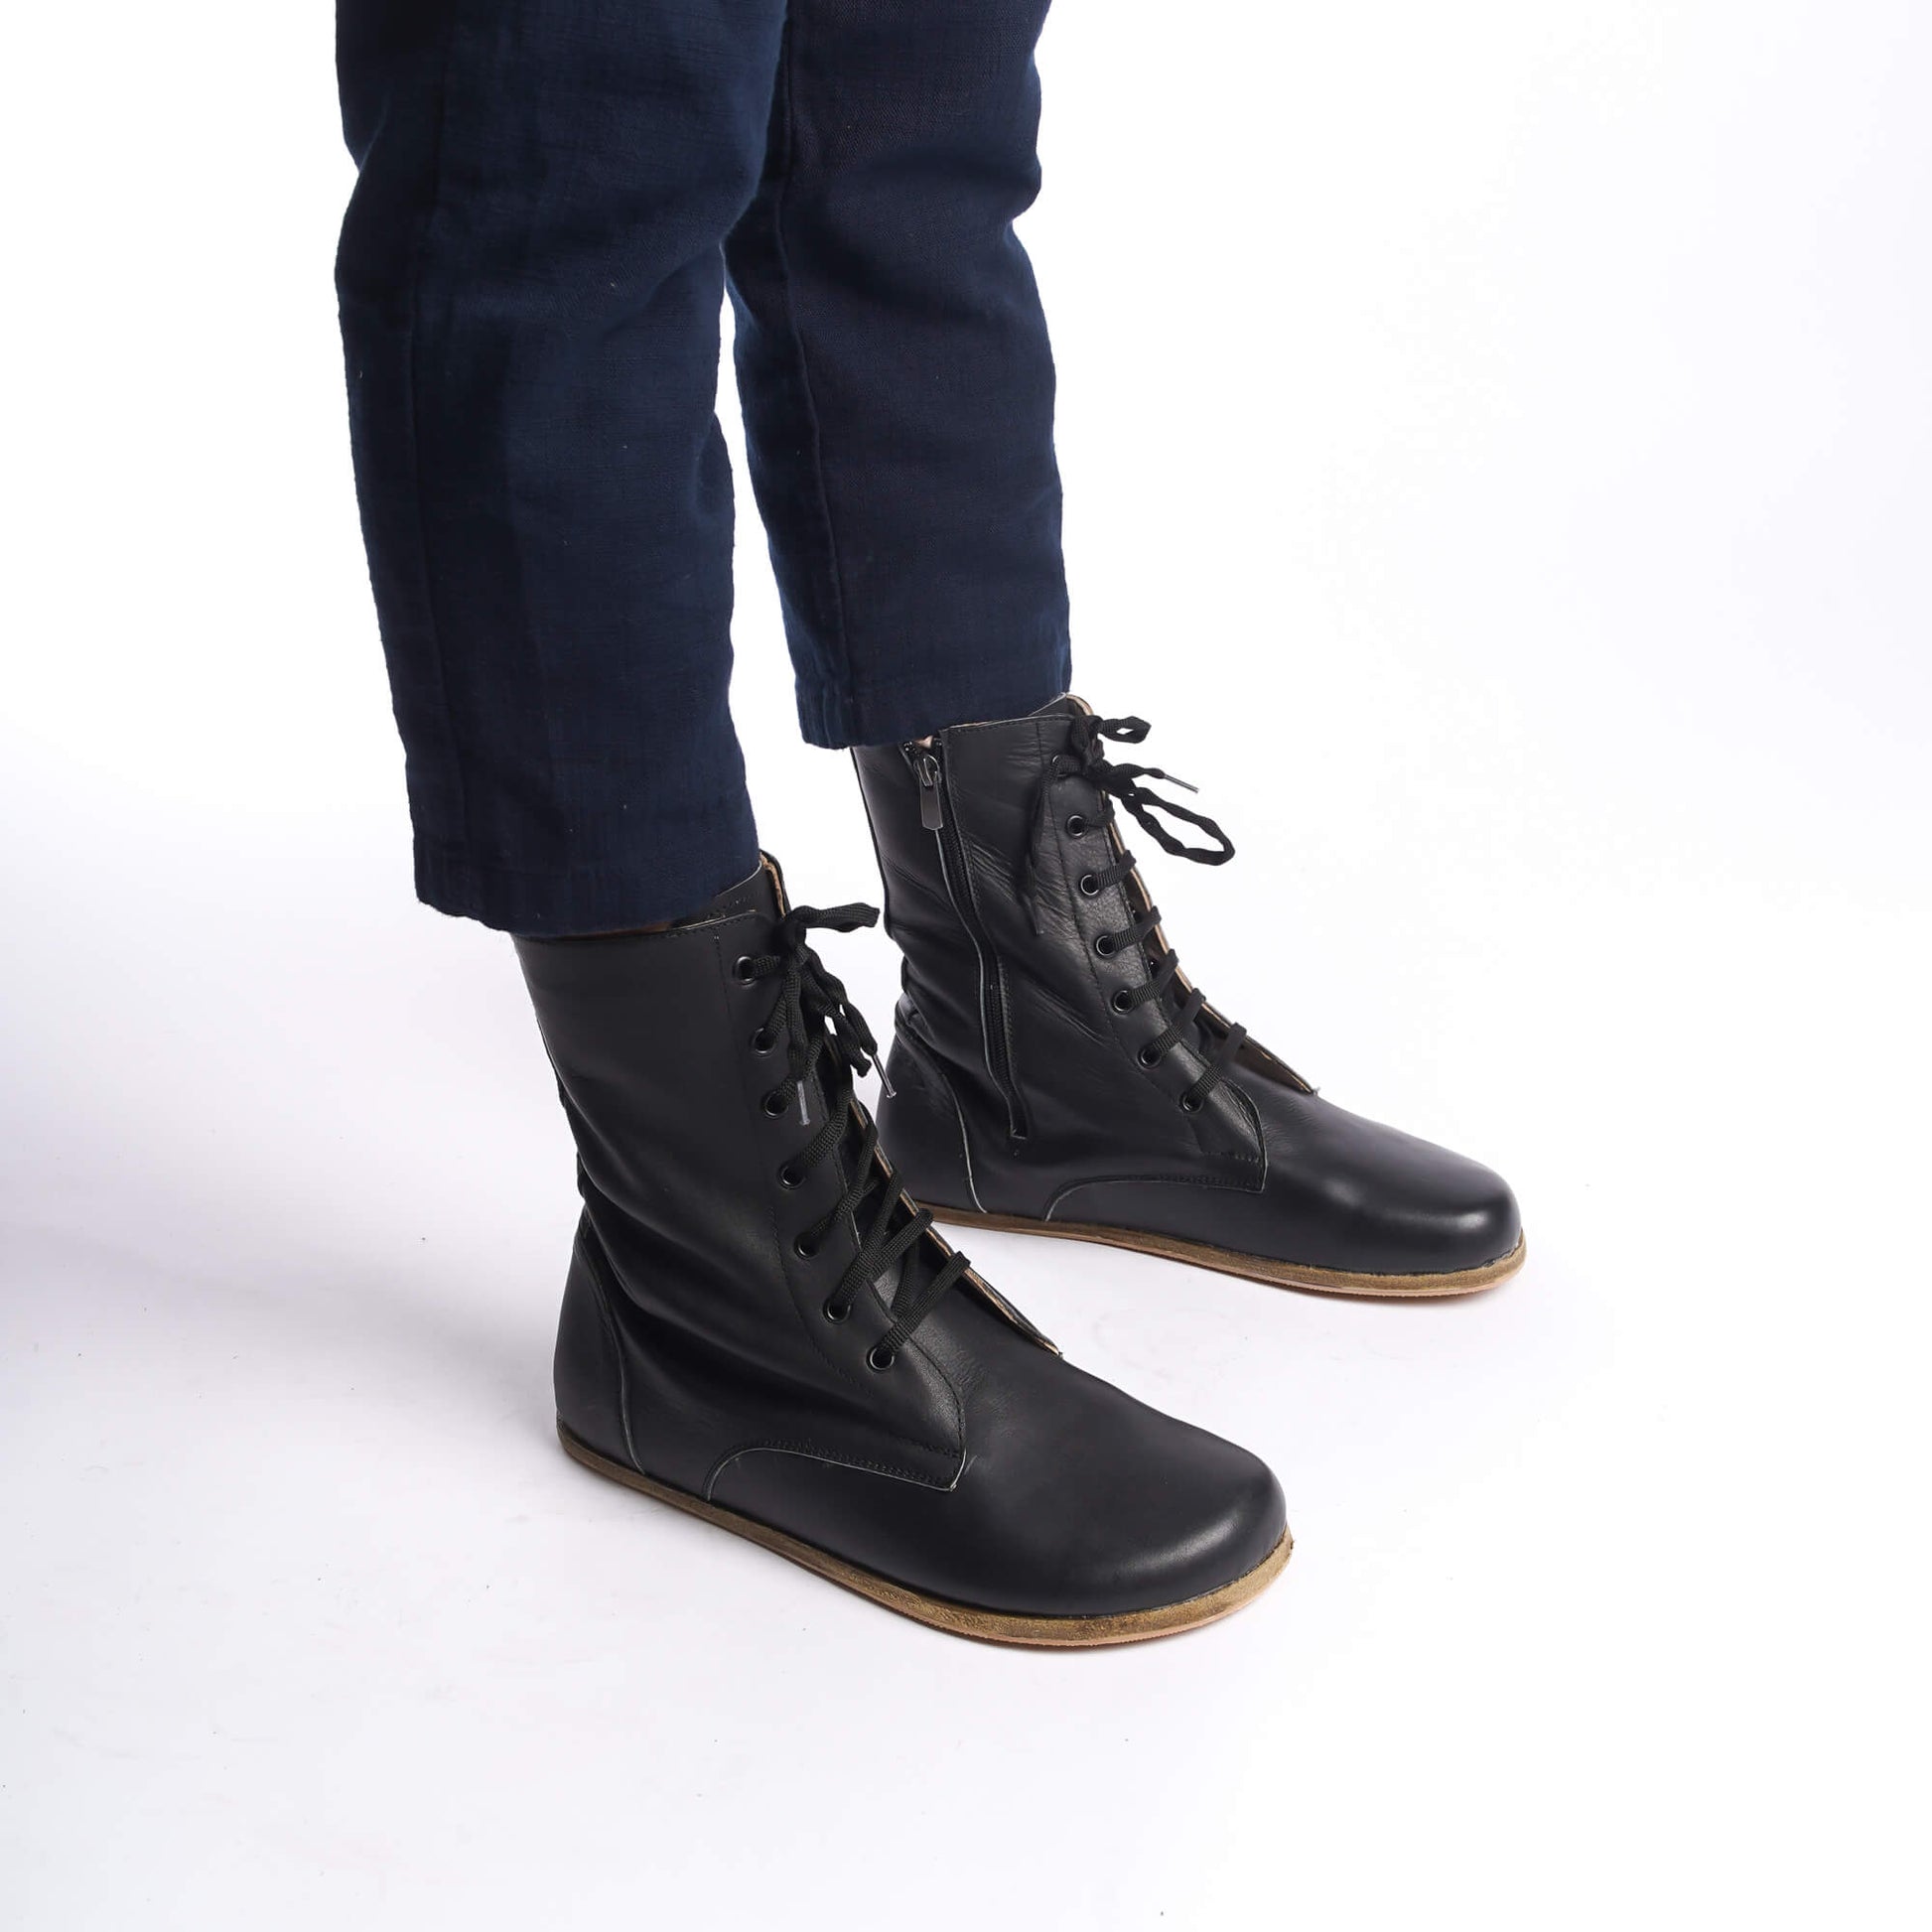 Side view of men's black barefoot boots, emphasizing the lace-up design and premium leather.